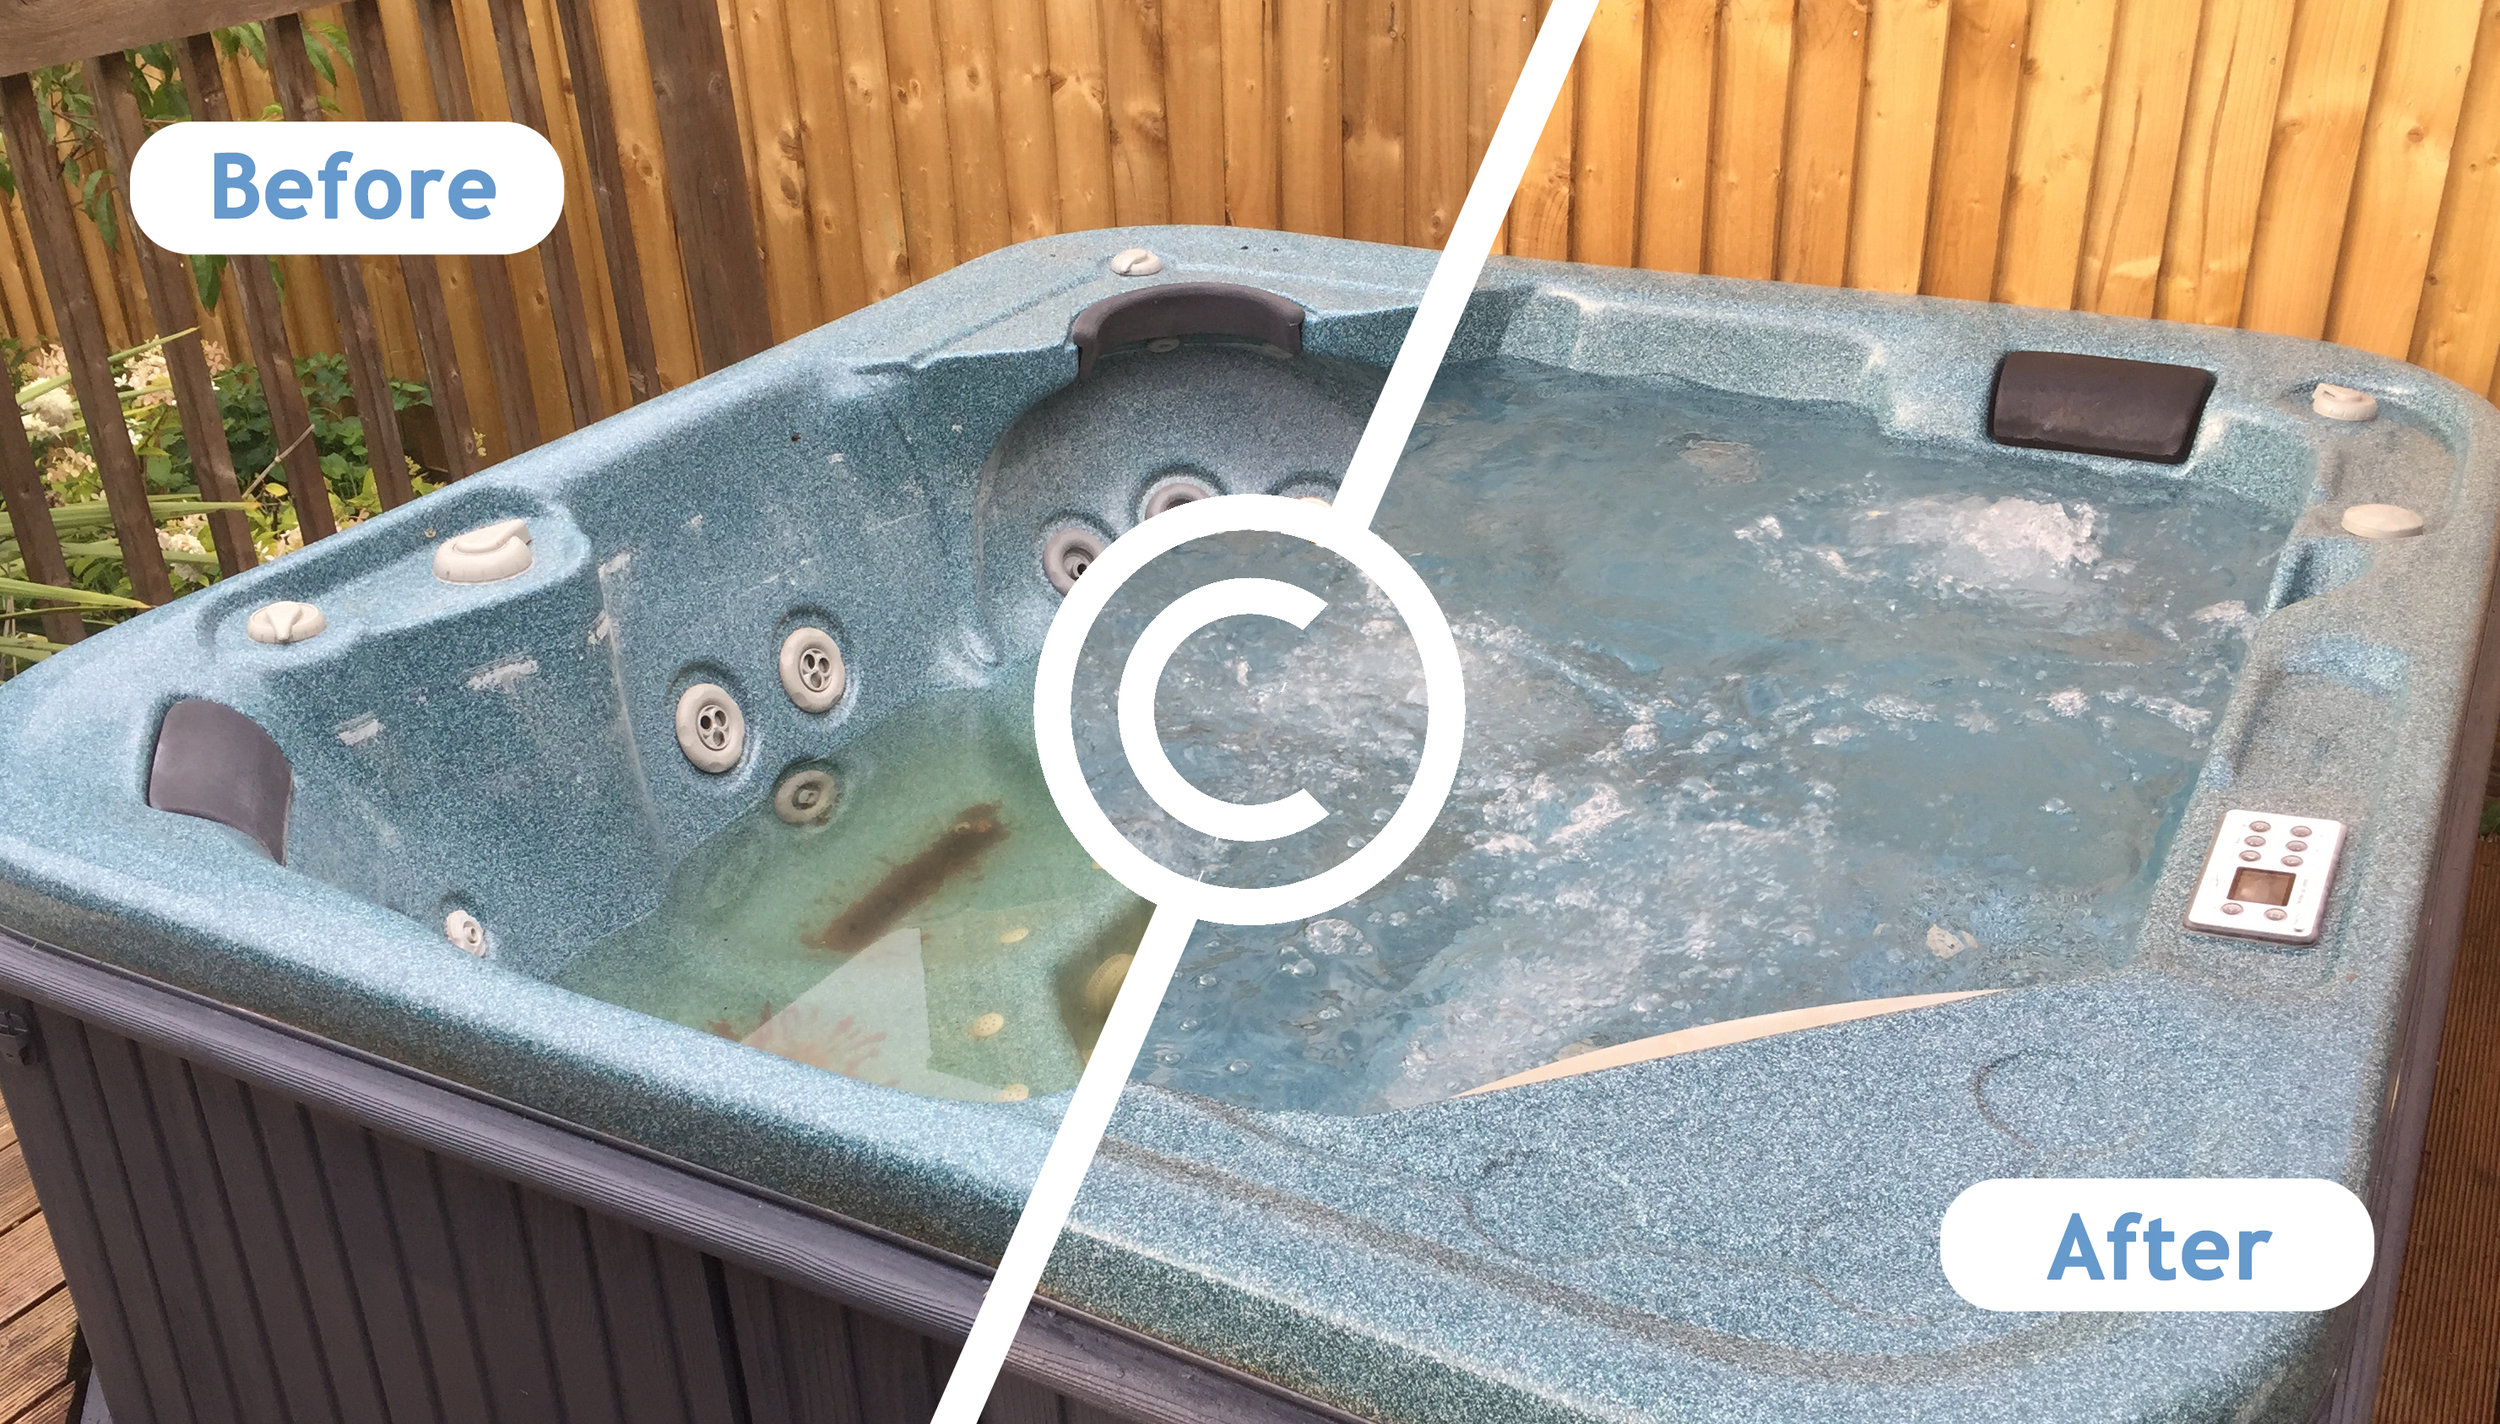 Comprehensive Hot Tub Service Before And After.jpg